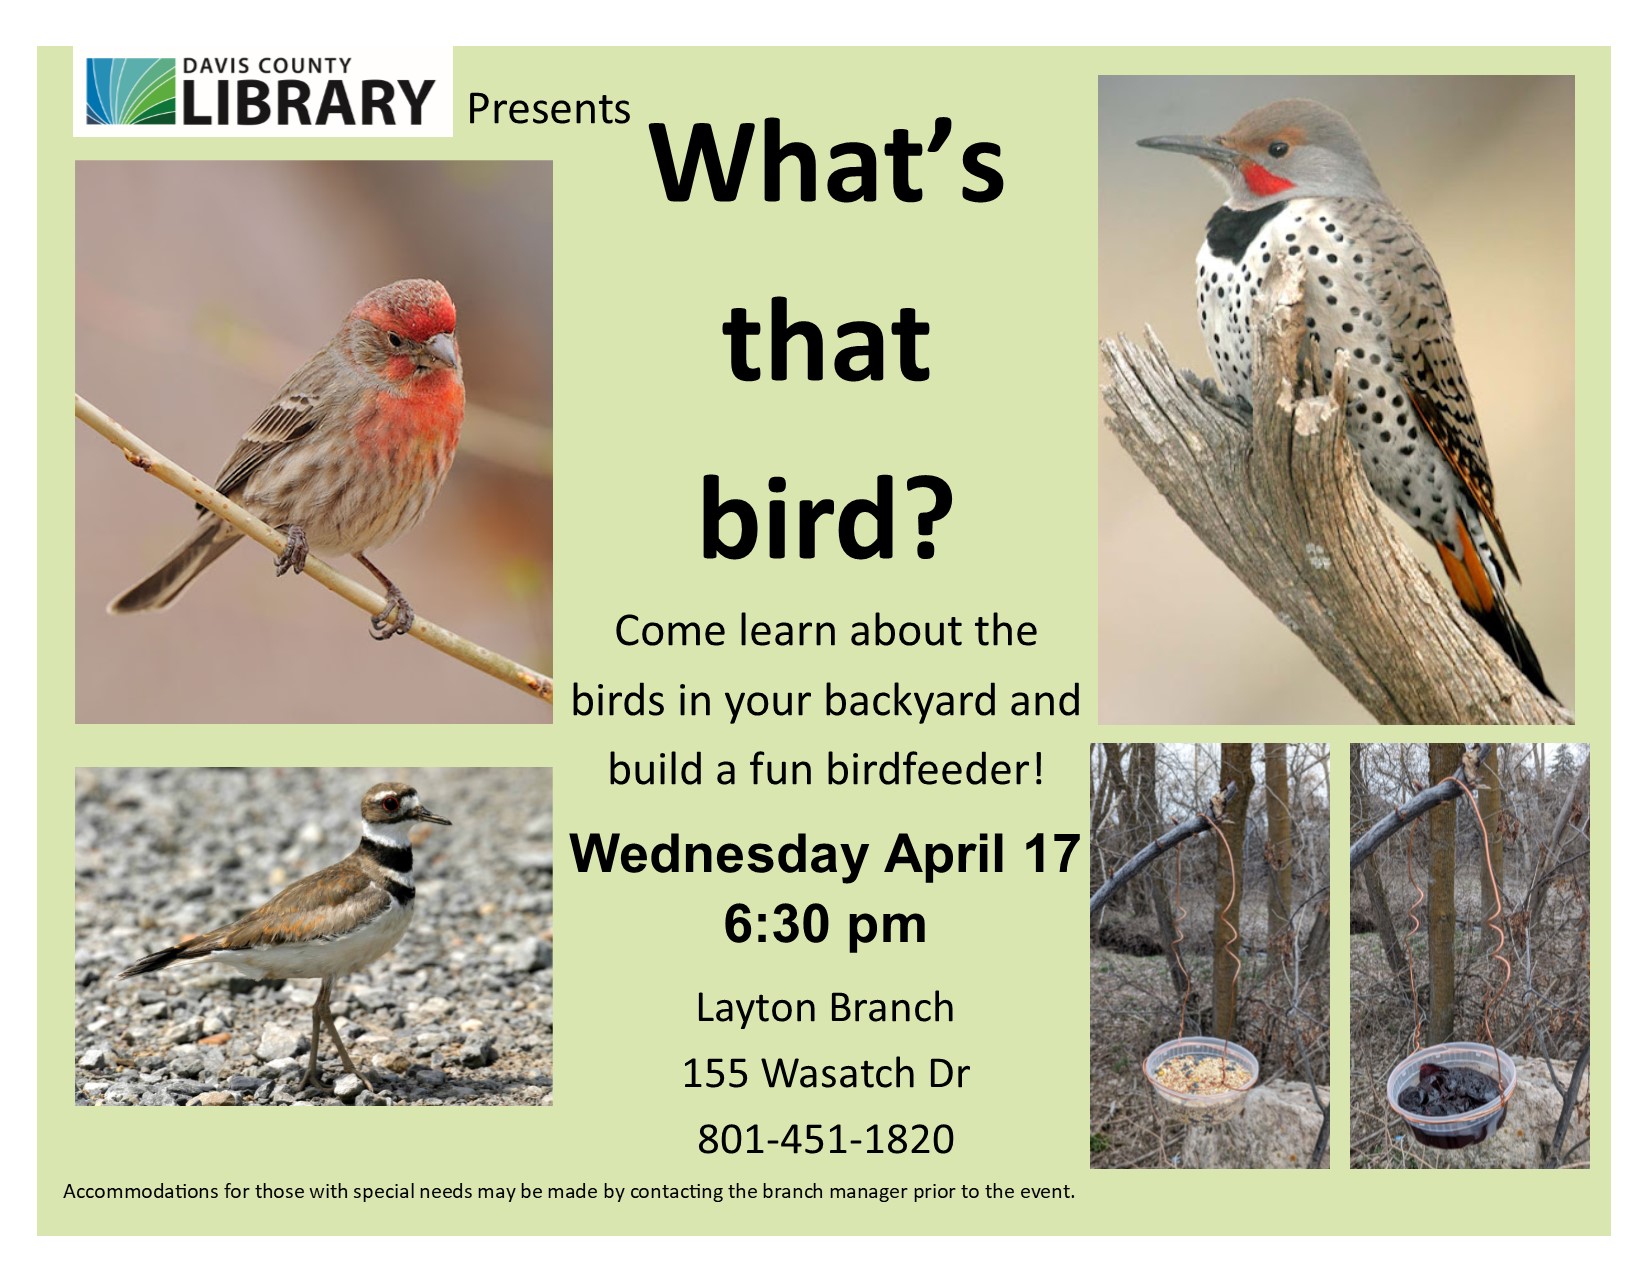 What's that bird? Wednesday April 17, 6:30 pm. Photos of House Finch, Northern Flicker, Killdeer and homemade bird feeder 